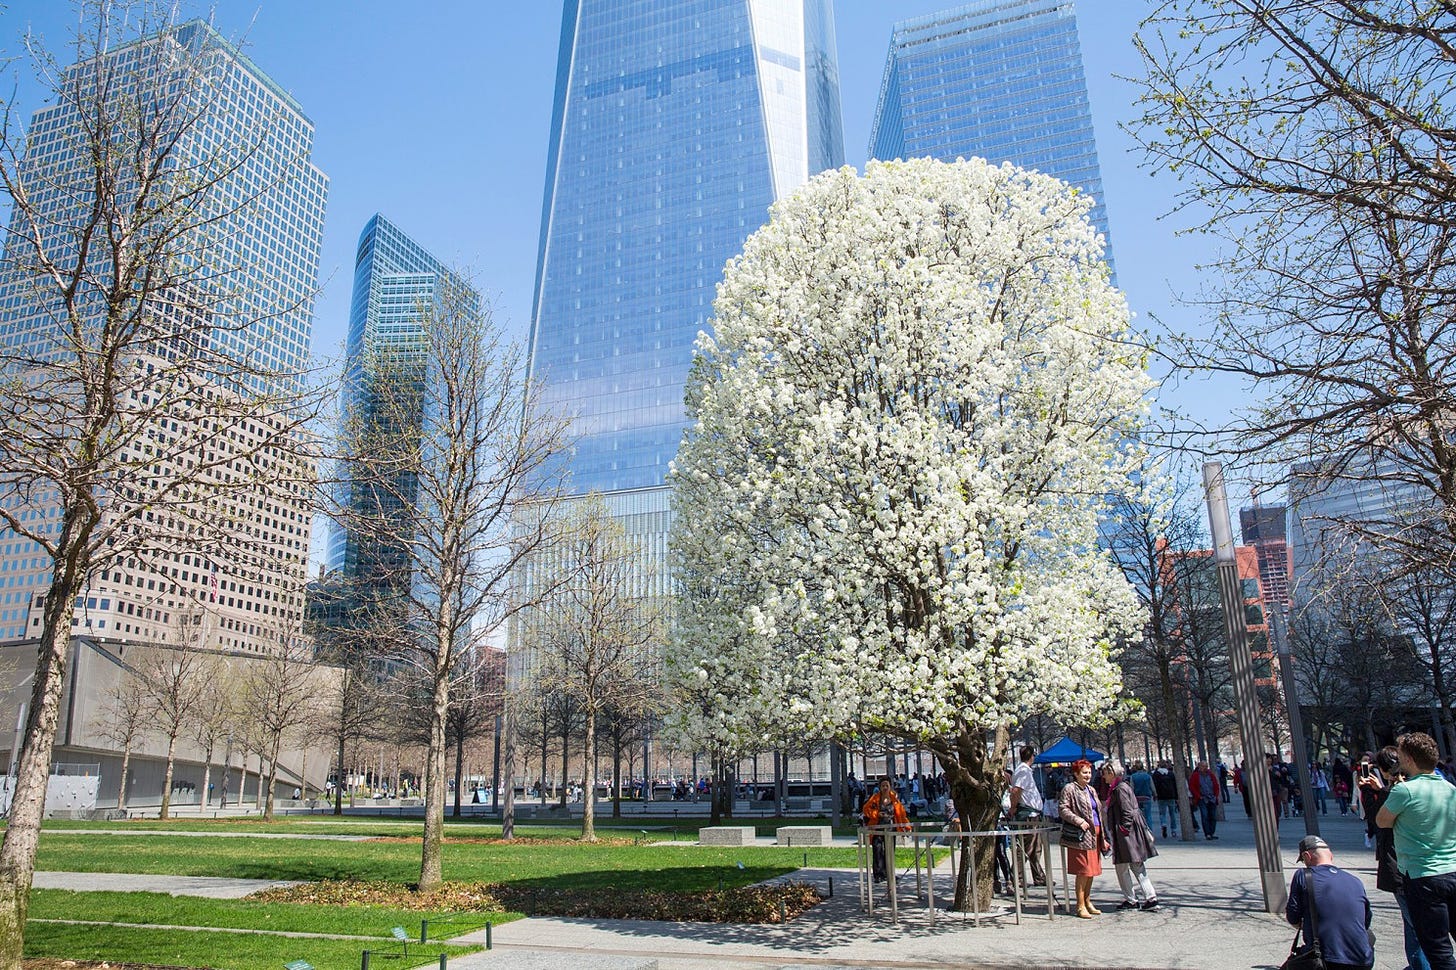 A large, flowering white tree blooms in the foreground with glass and steel skyscrapers behind it.